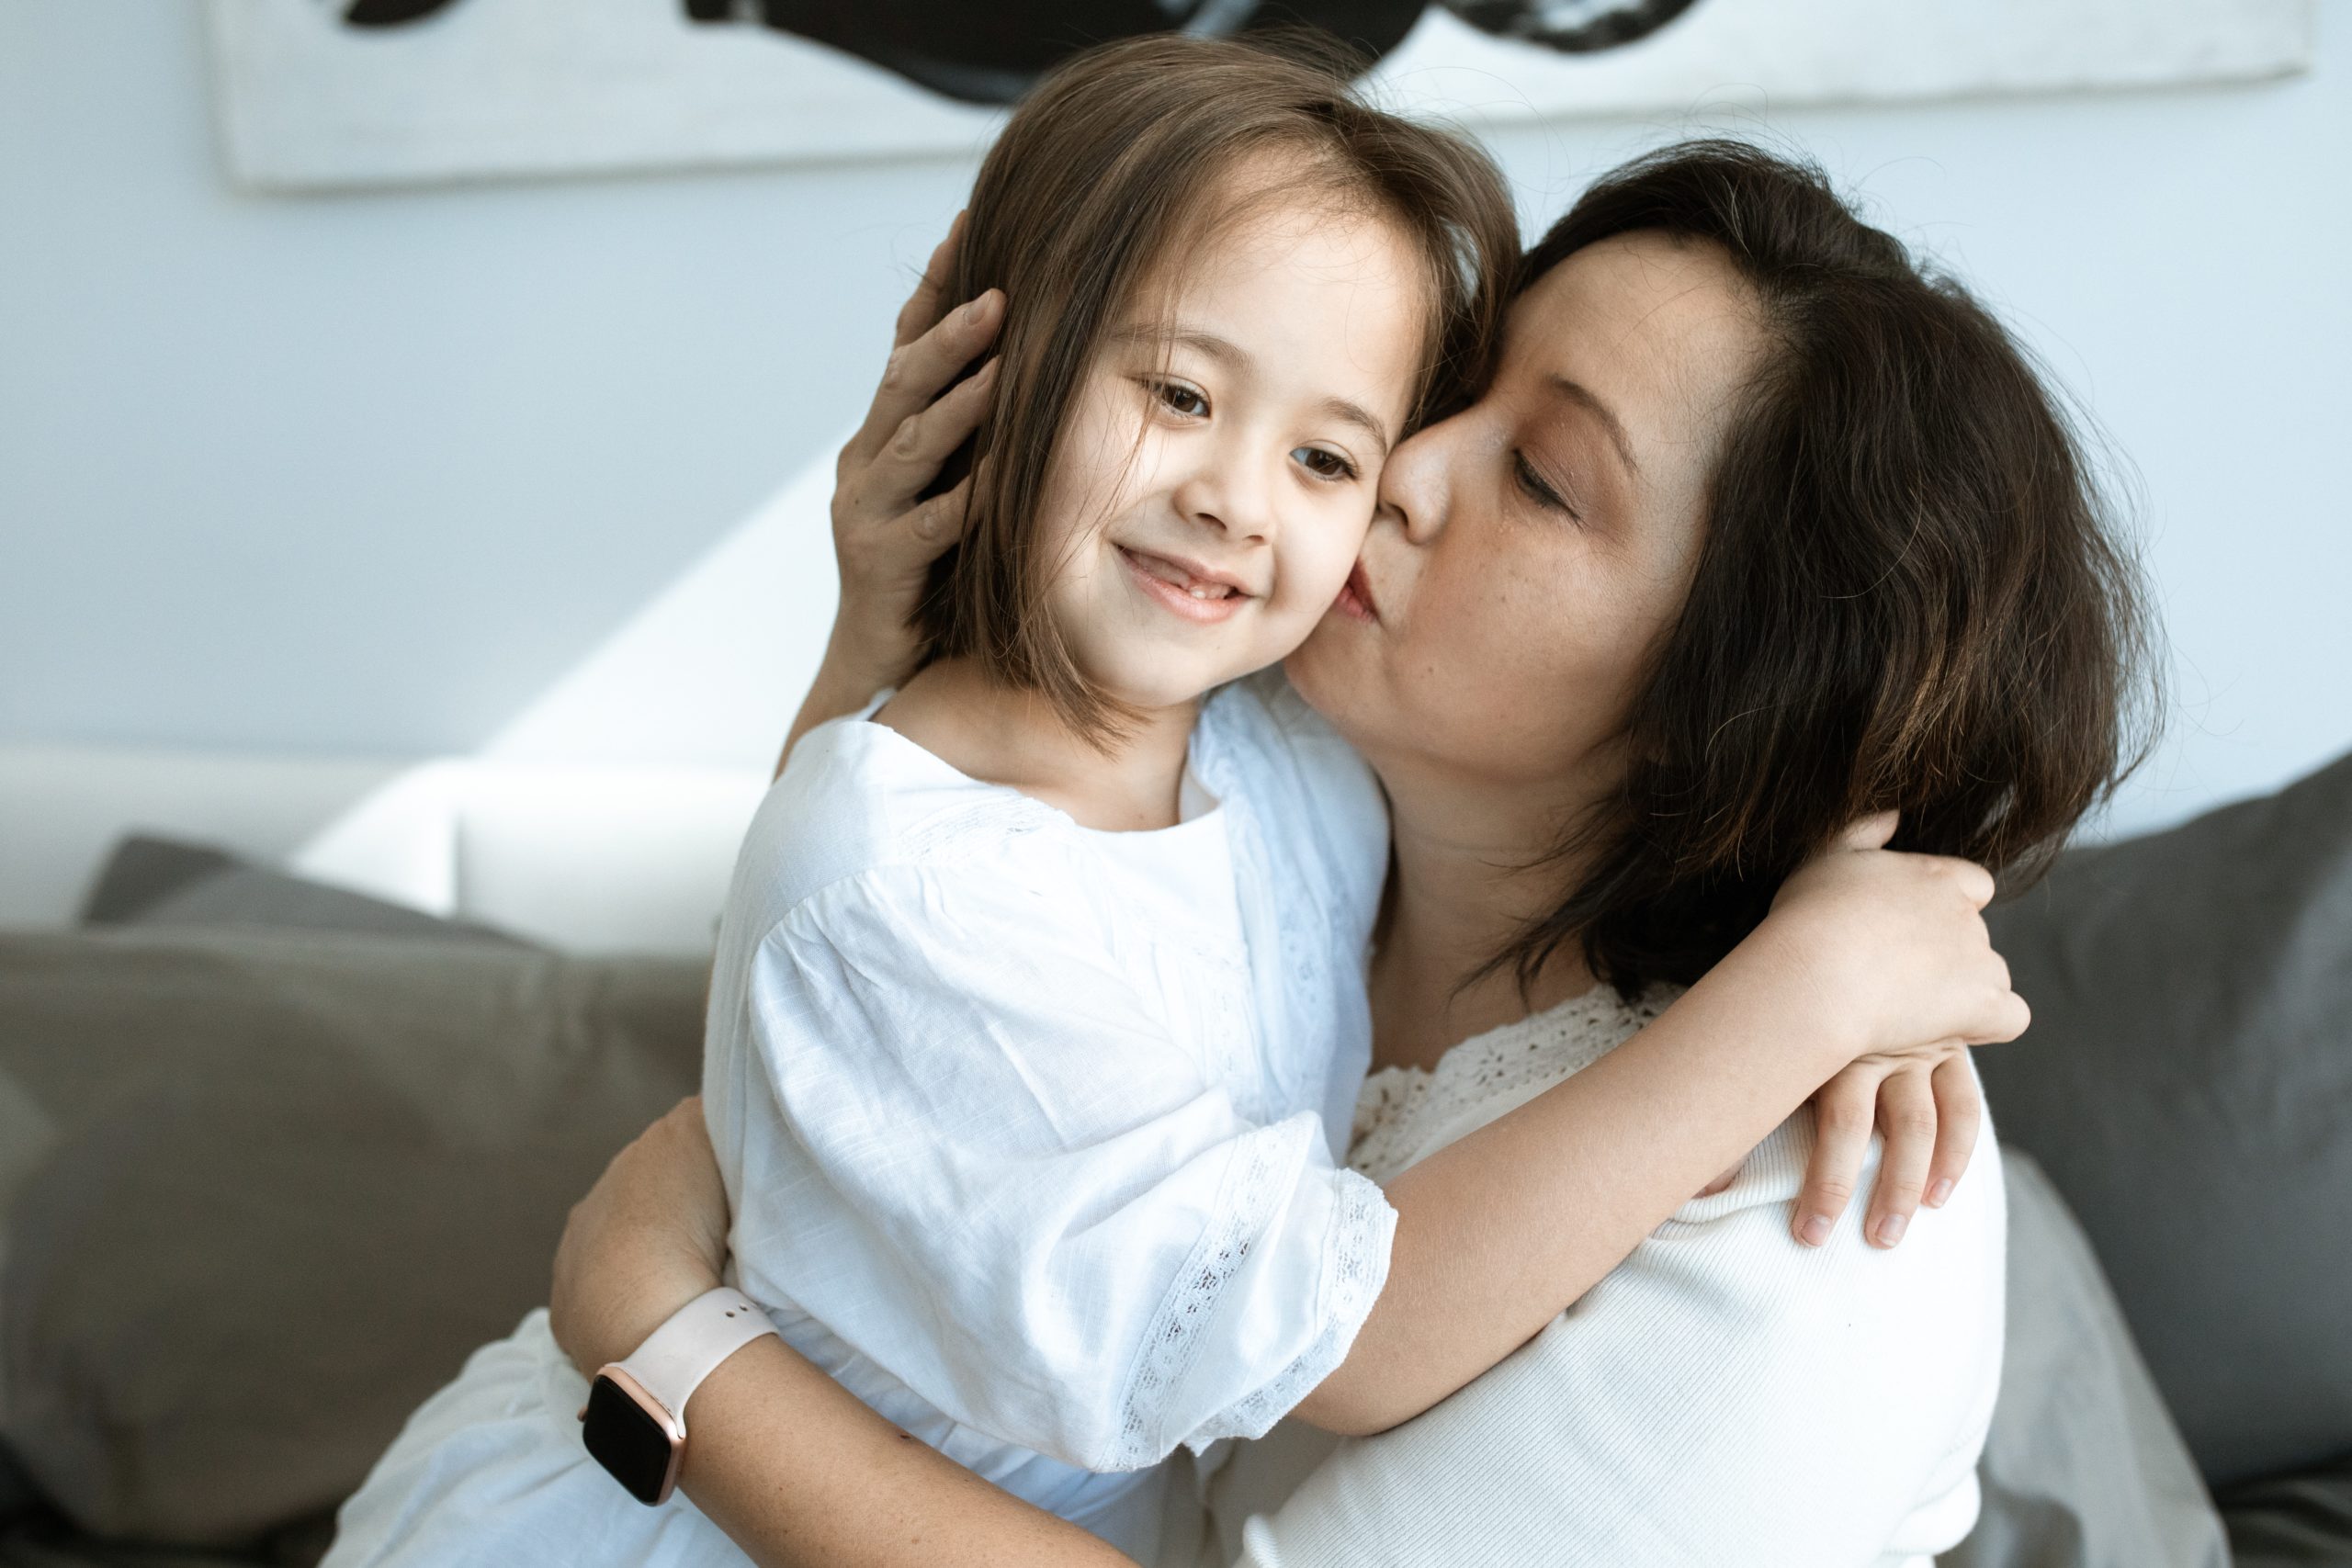 A woman embracing and kissing her young daughter on the cheek.